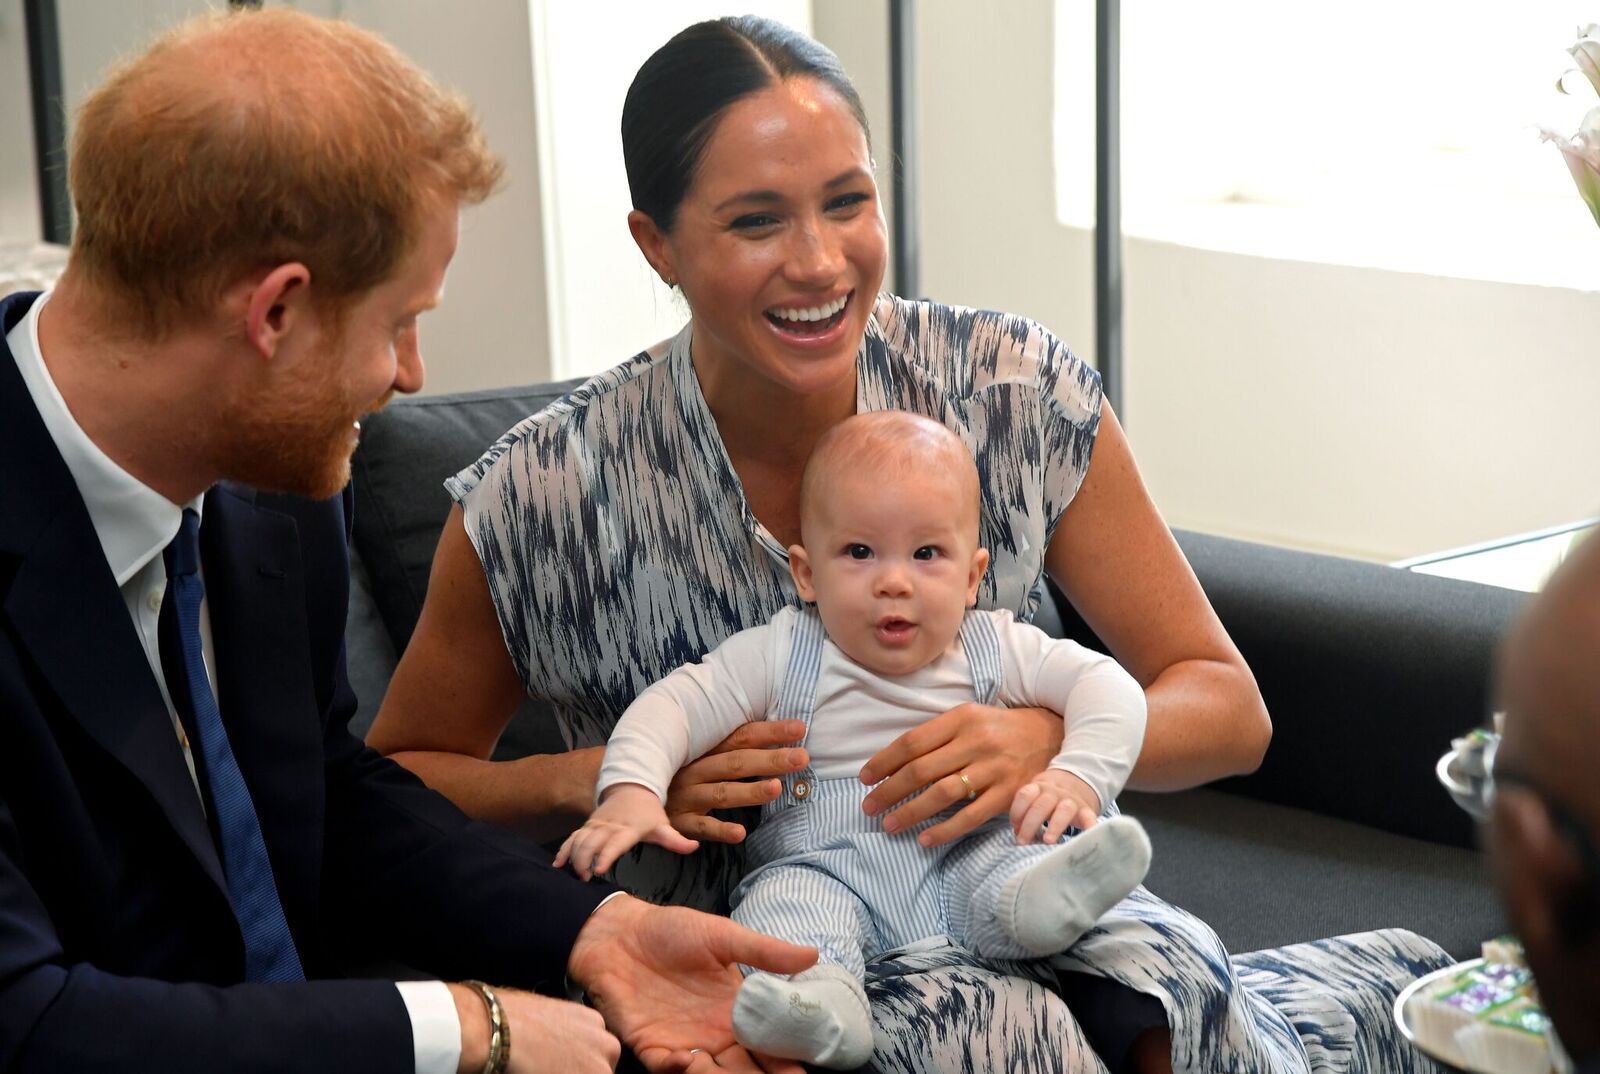 Prince Harry and Duchess Meghan with baby Archie Mountbatten-Windsor at the Desmond & Leah Tutu Legacy Foundation on September 25, 2019, in Cape Town, South Africa | Photo: Toby Melville - Pool/Getty Images